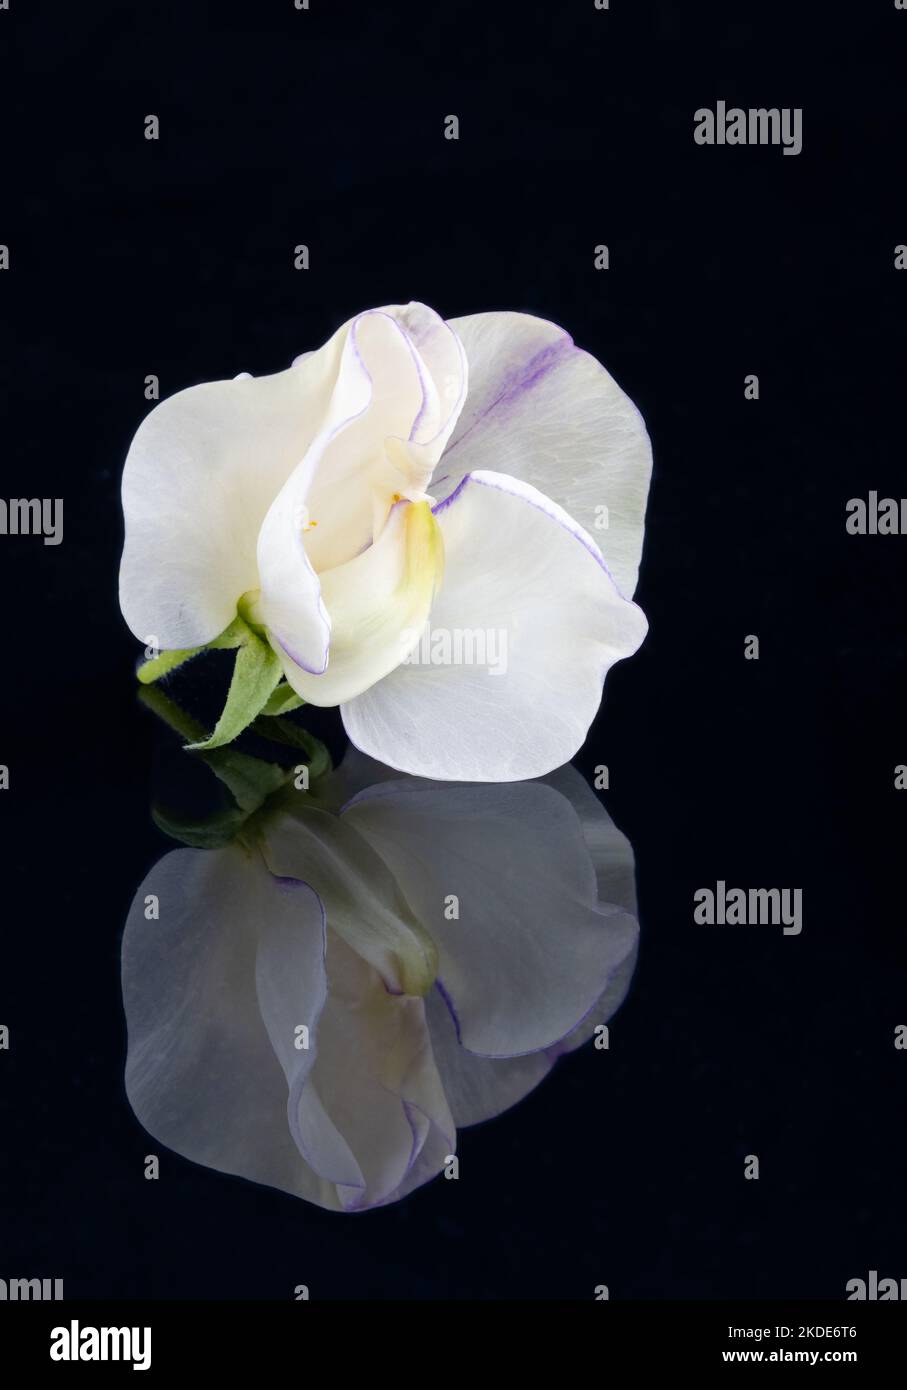 Sweet pea flower on black background with reflection Stock Photo